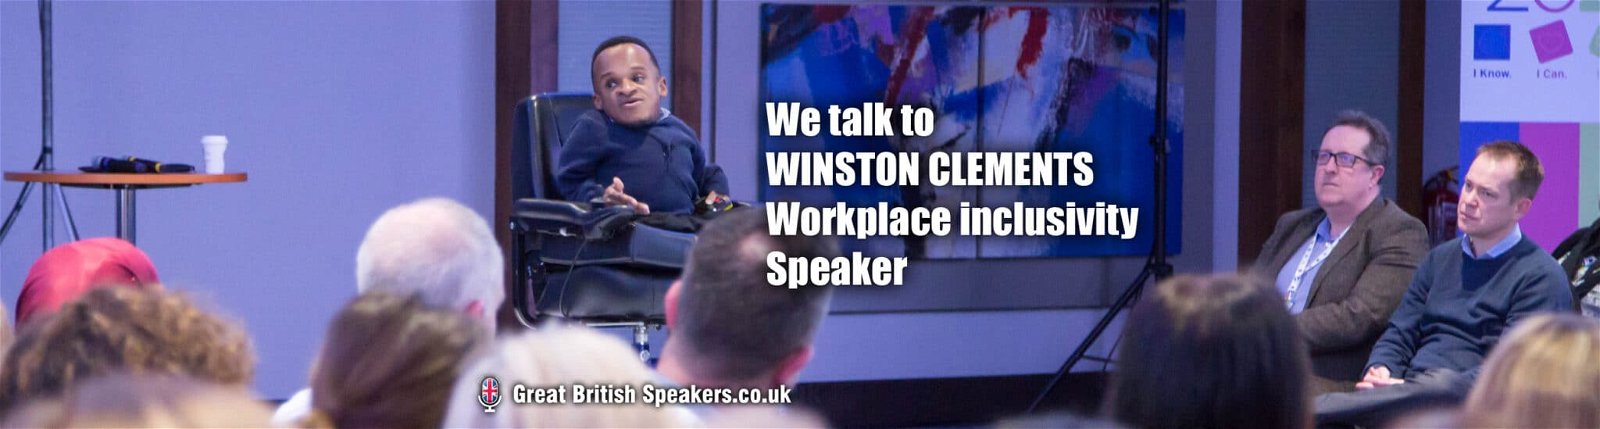 Book workplace equality diversity inclusion speaker Winston Ben Clements at agent Great British Speakers